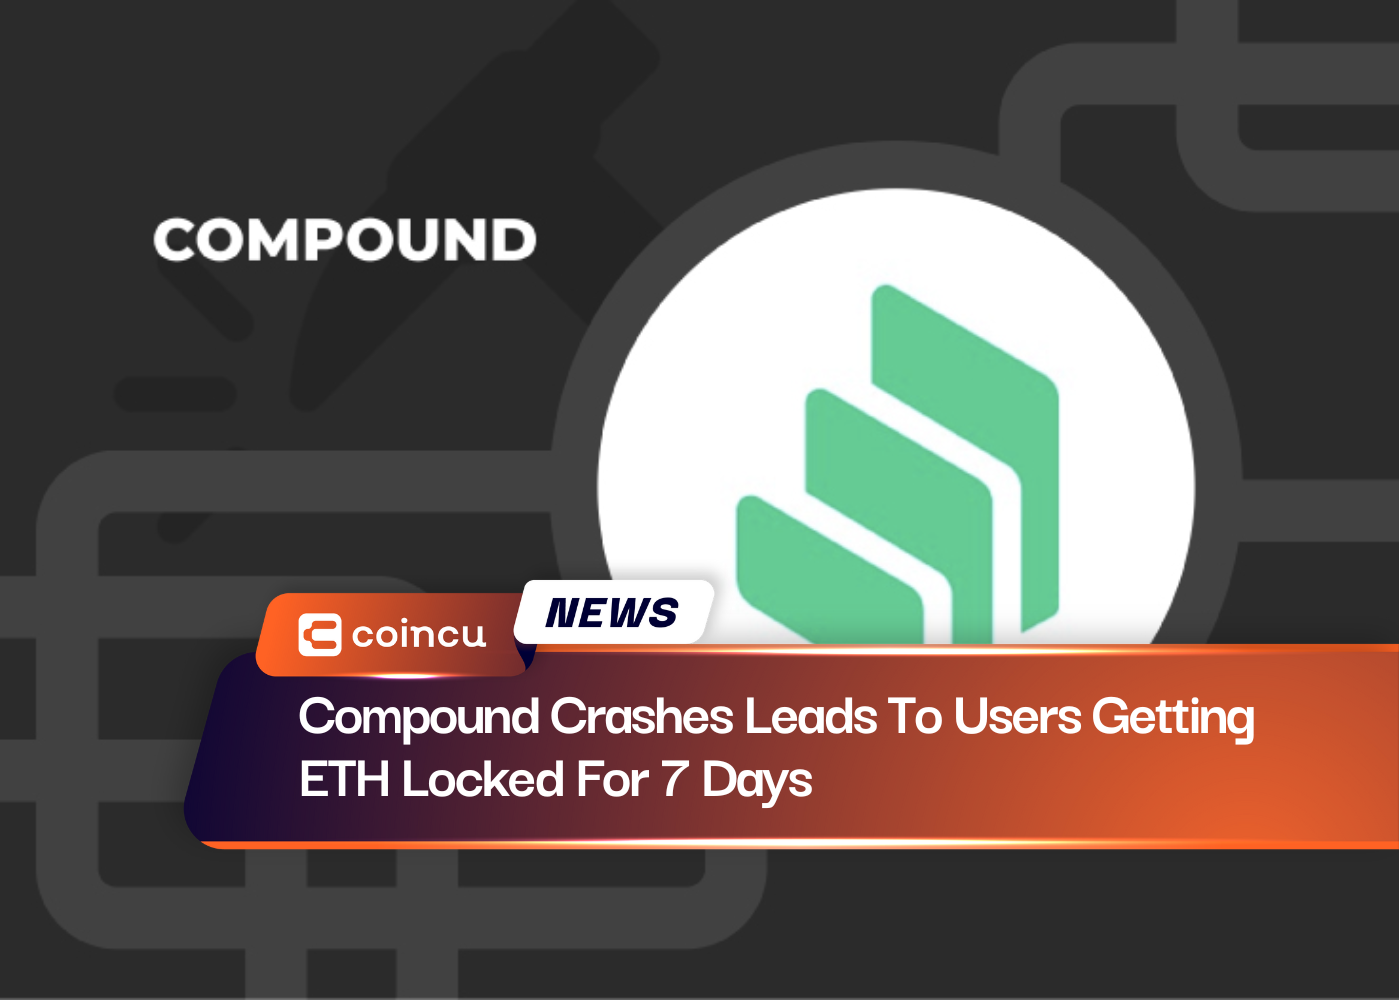 Compound Crashes Leads To Users Getting ETH Locked For 7 Days